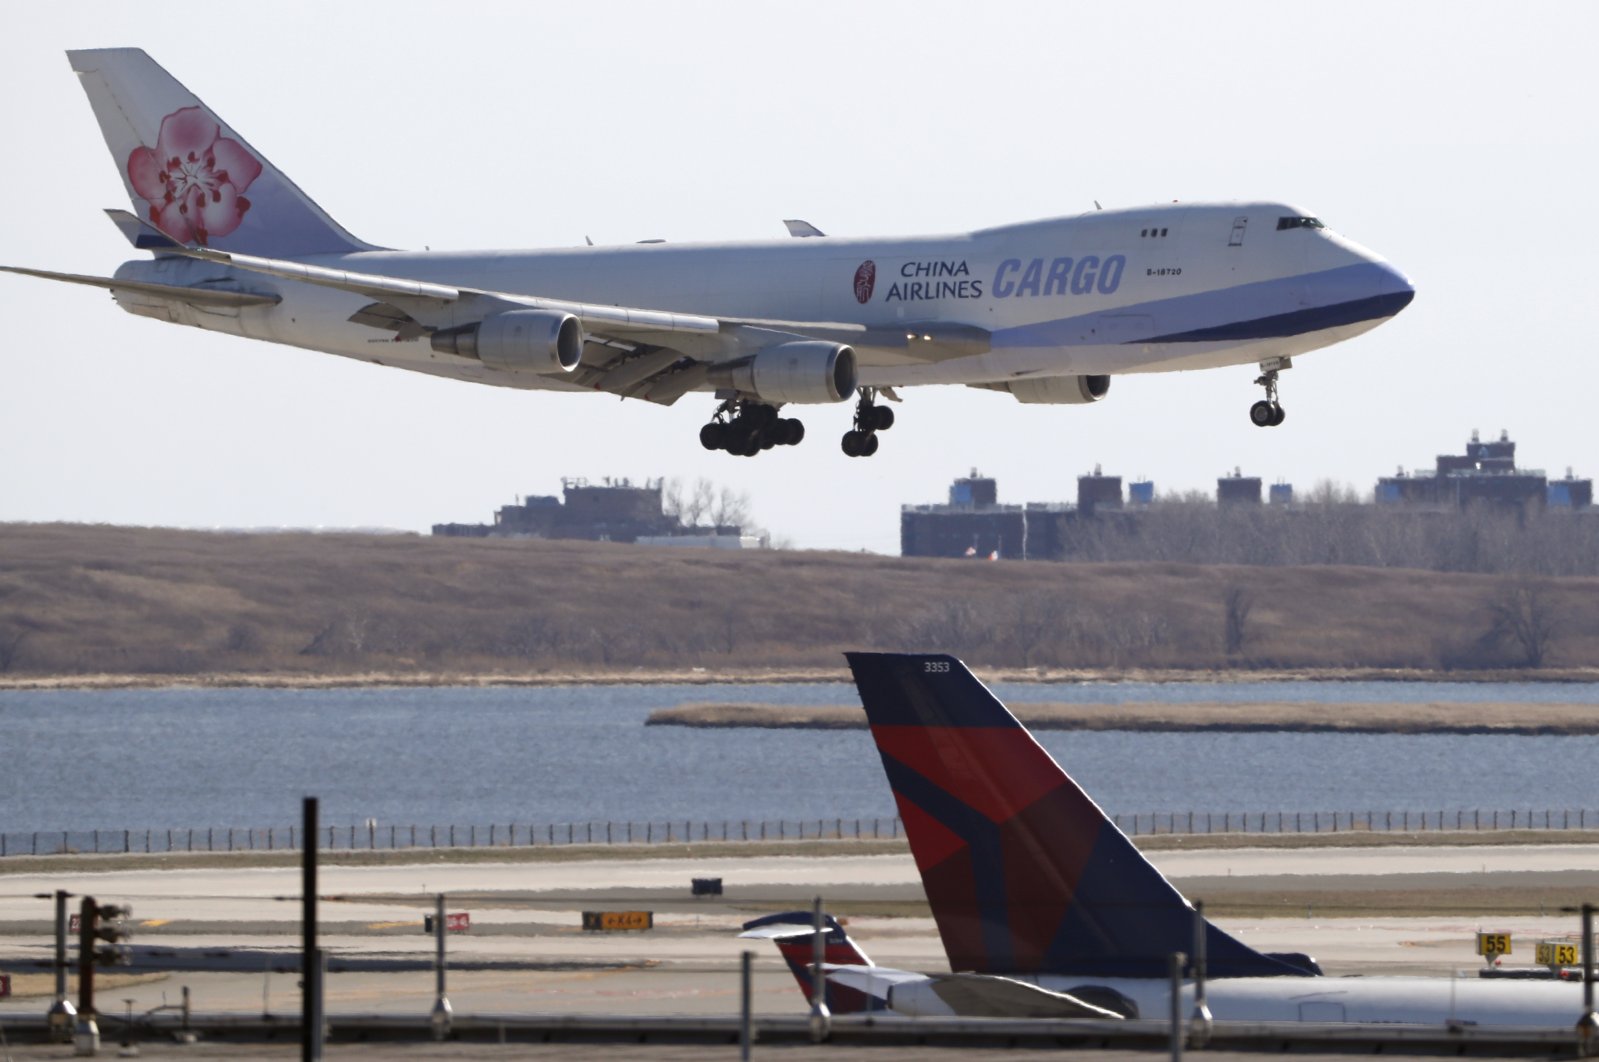 A China Airlines cargo jet lands at John F. Kennedy International Airport, New York, U.S., March 14, 2020. (AP Photo)